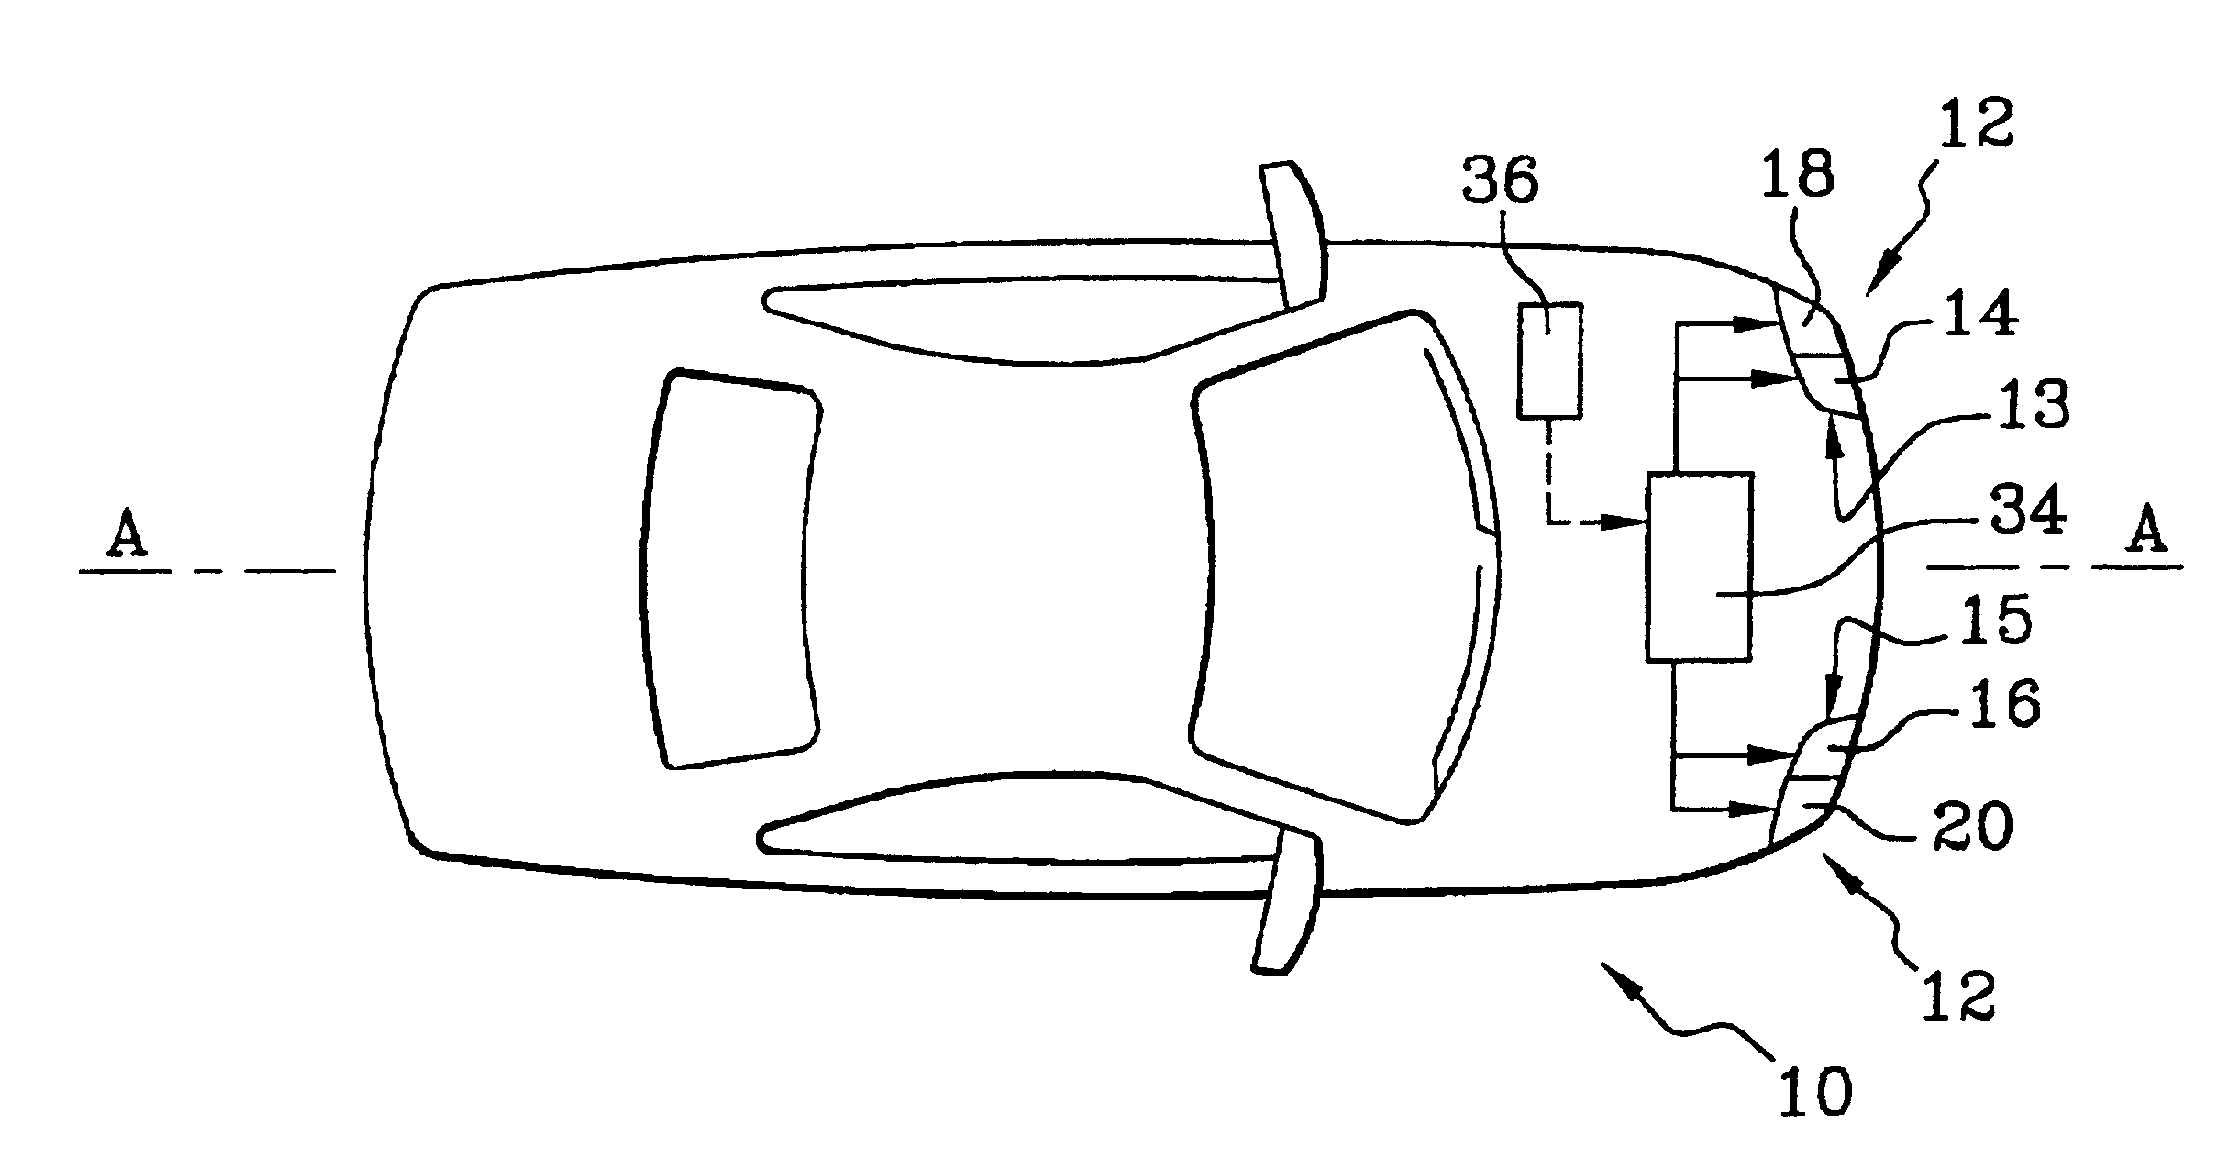 Apparatus for a motor vehicle, for lighting bends negotiated by the vehicle